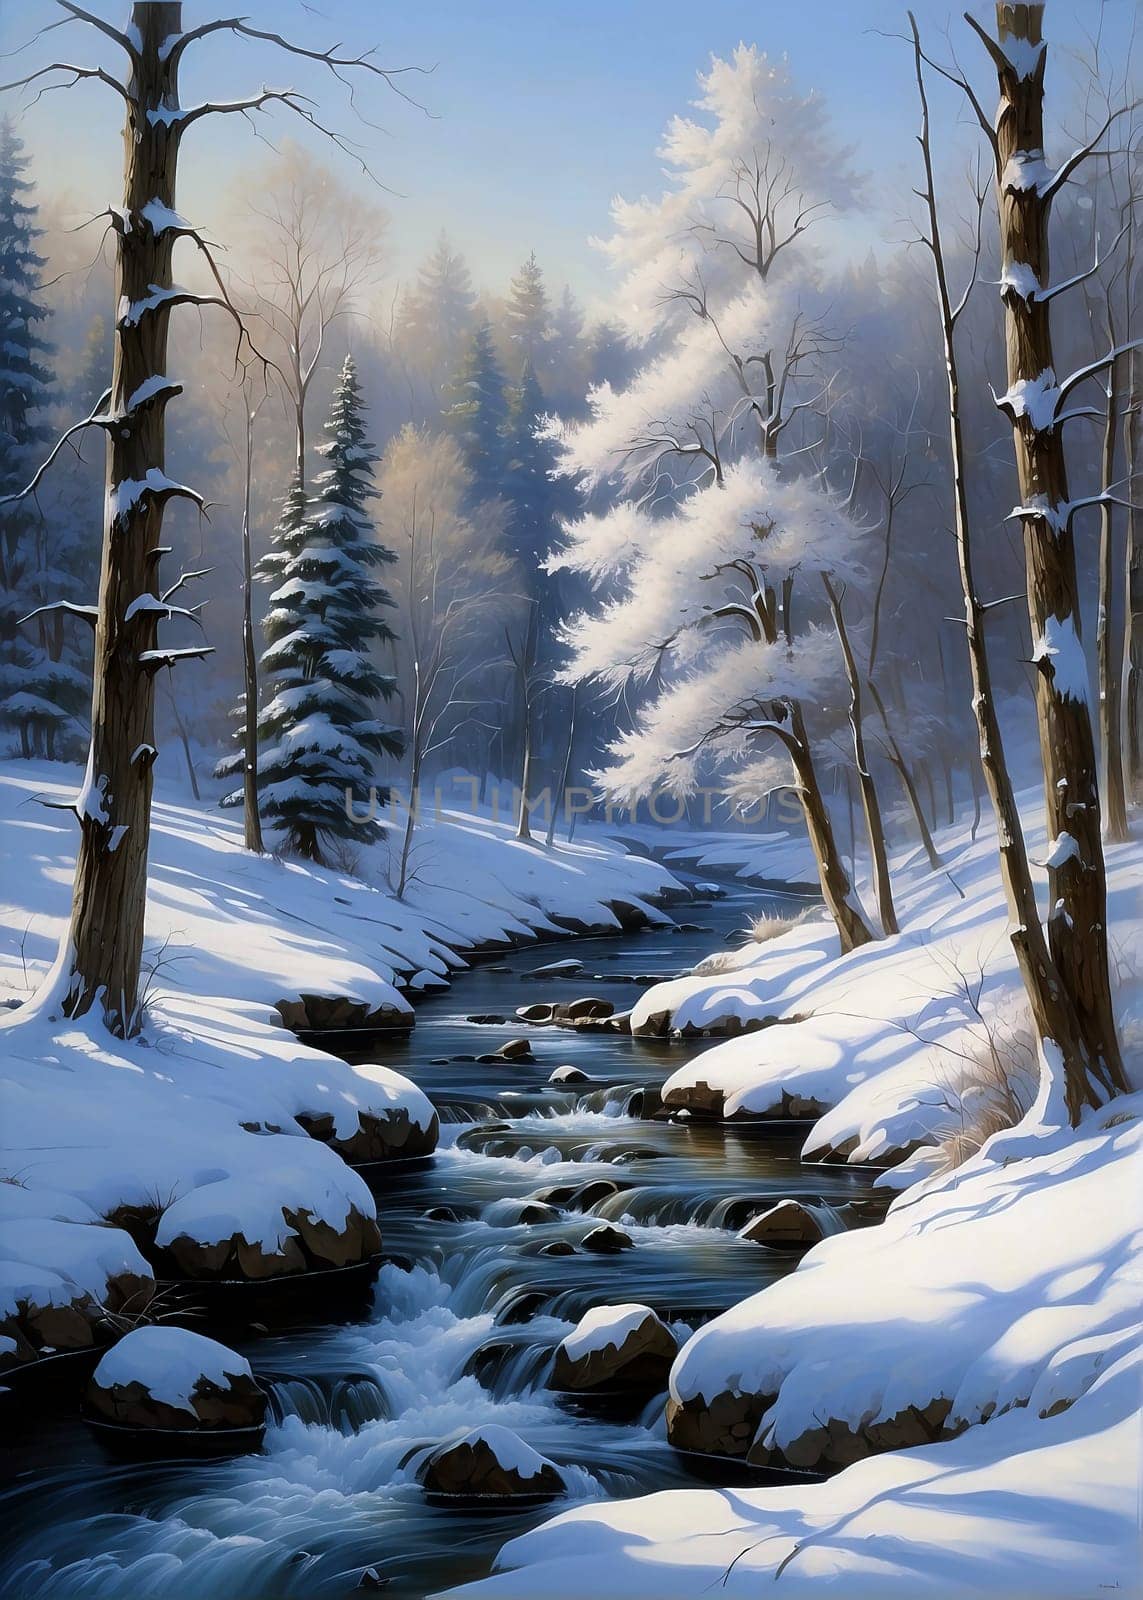 Stream in the winter forest by applesstock